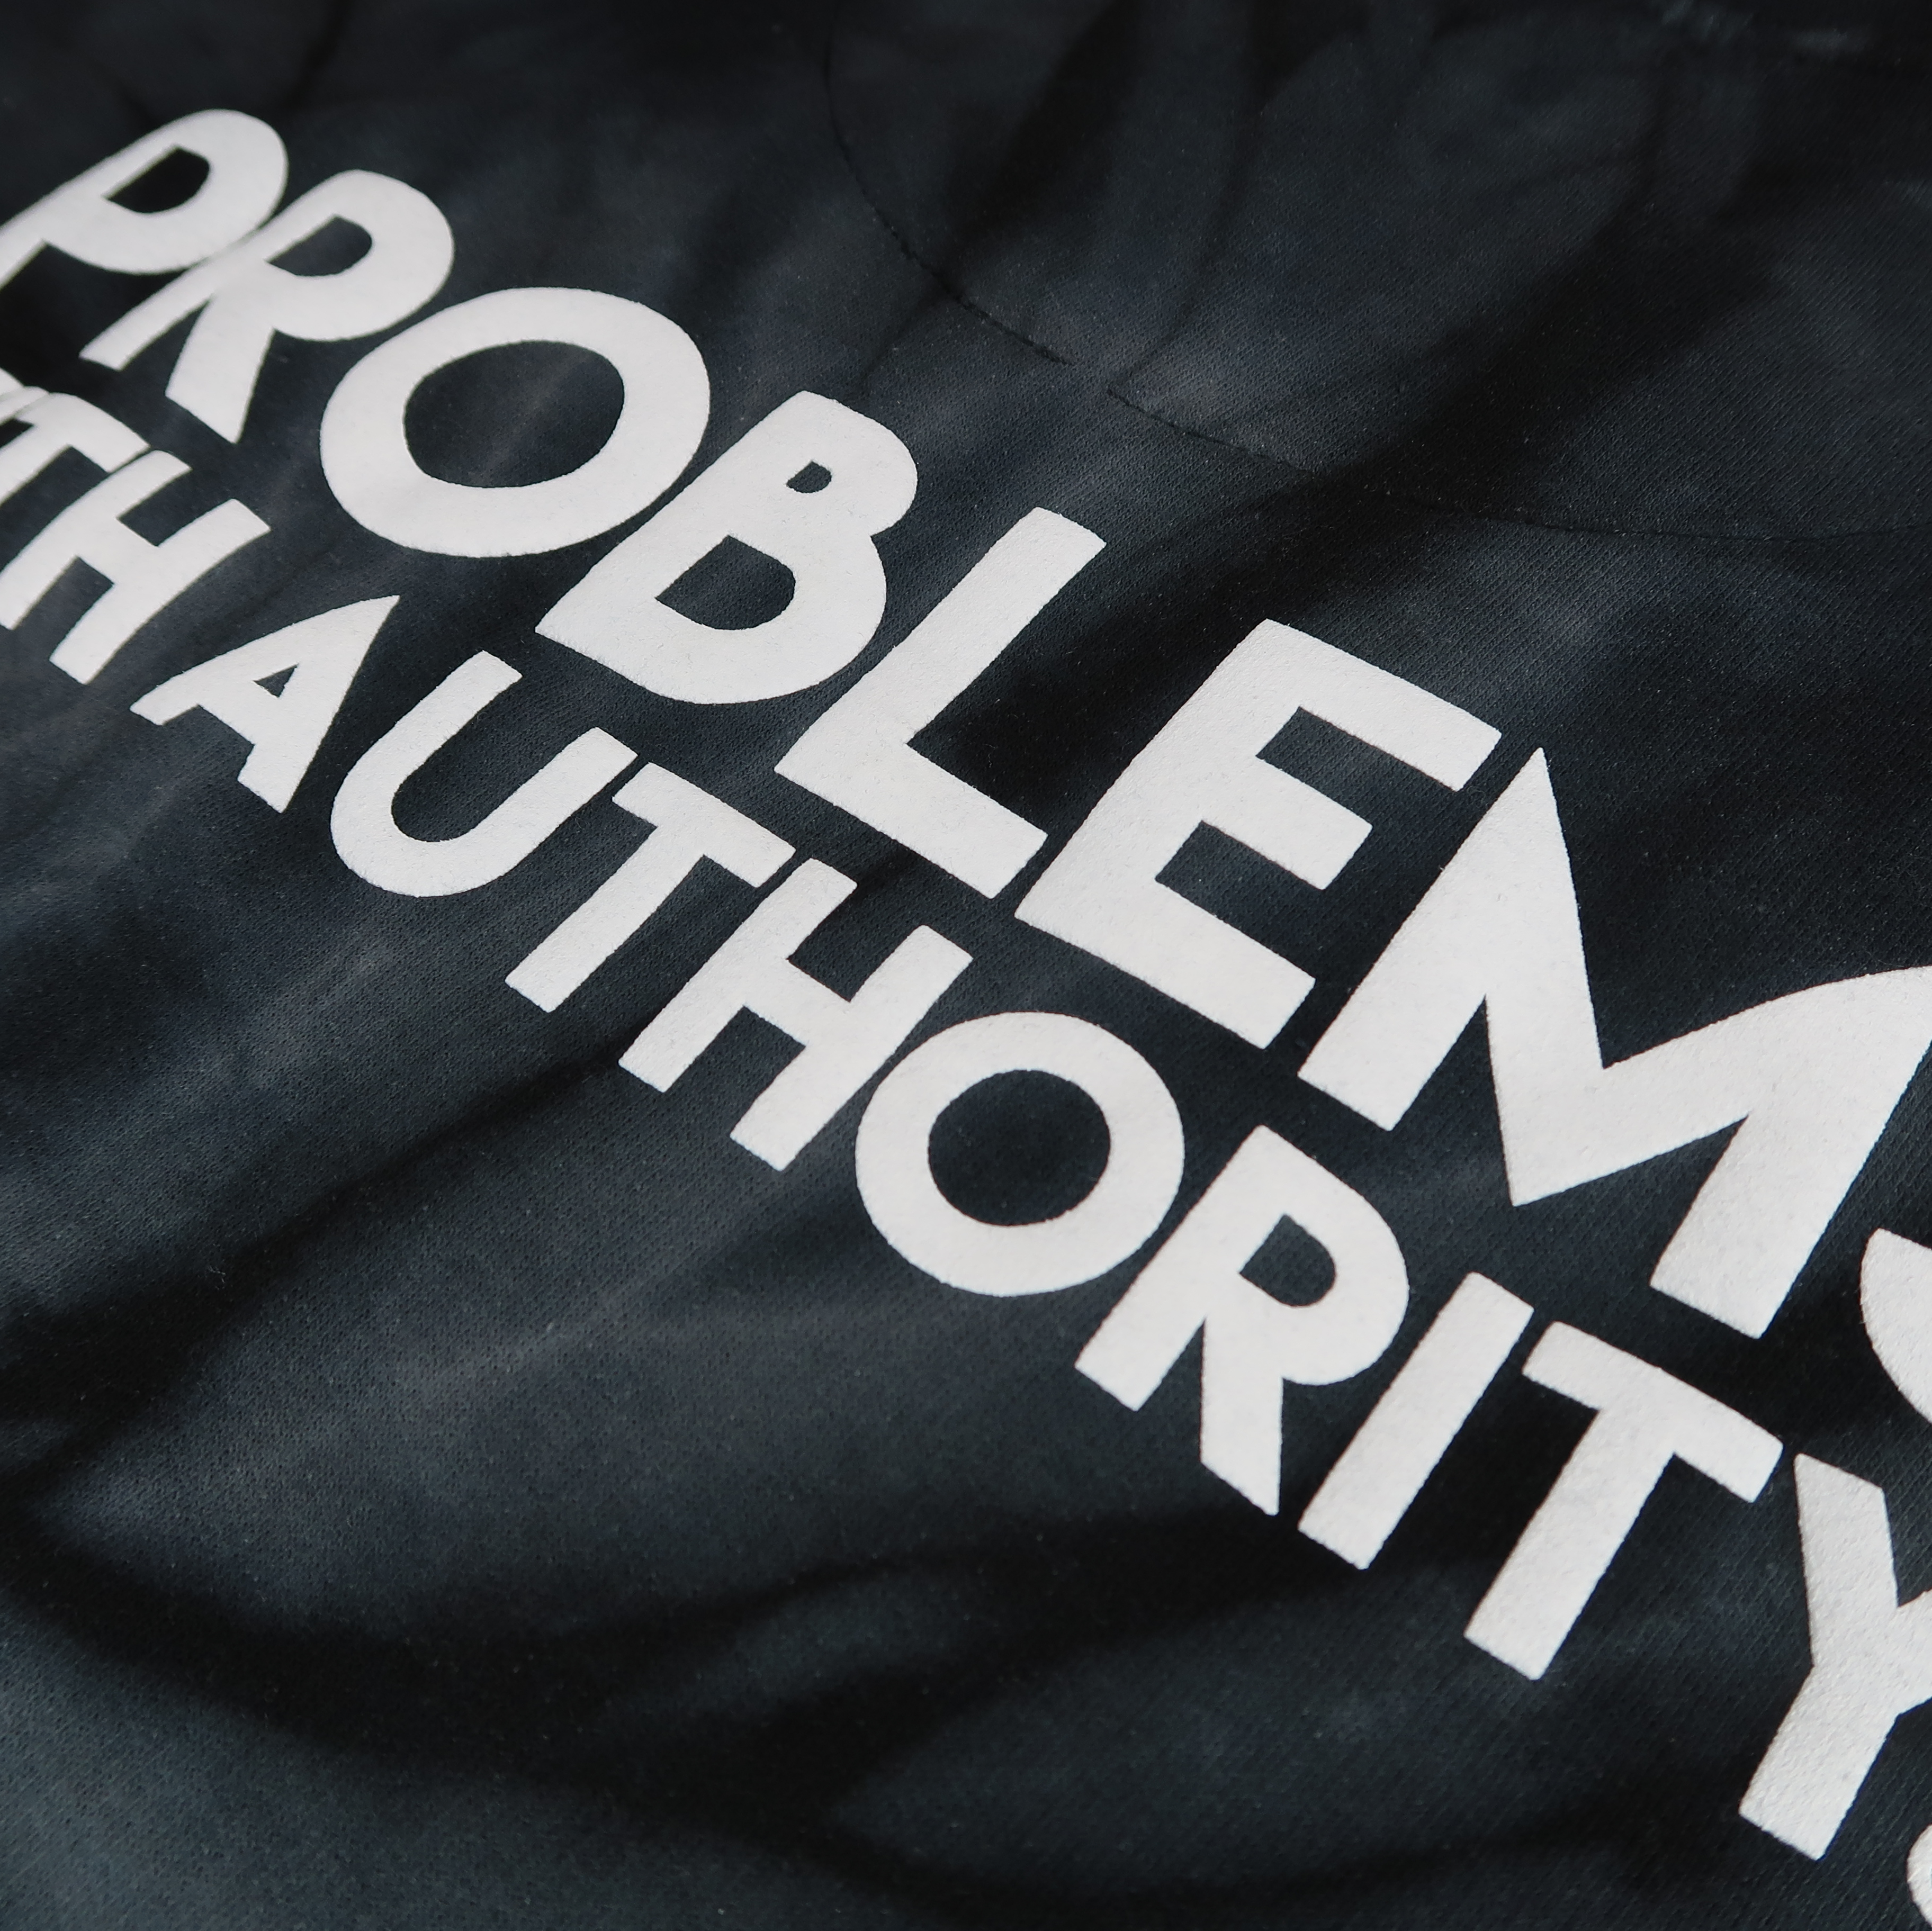 Problems With Authority Hoodie